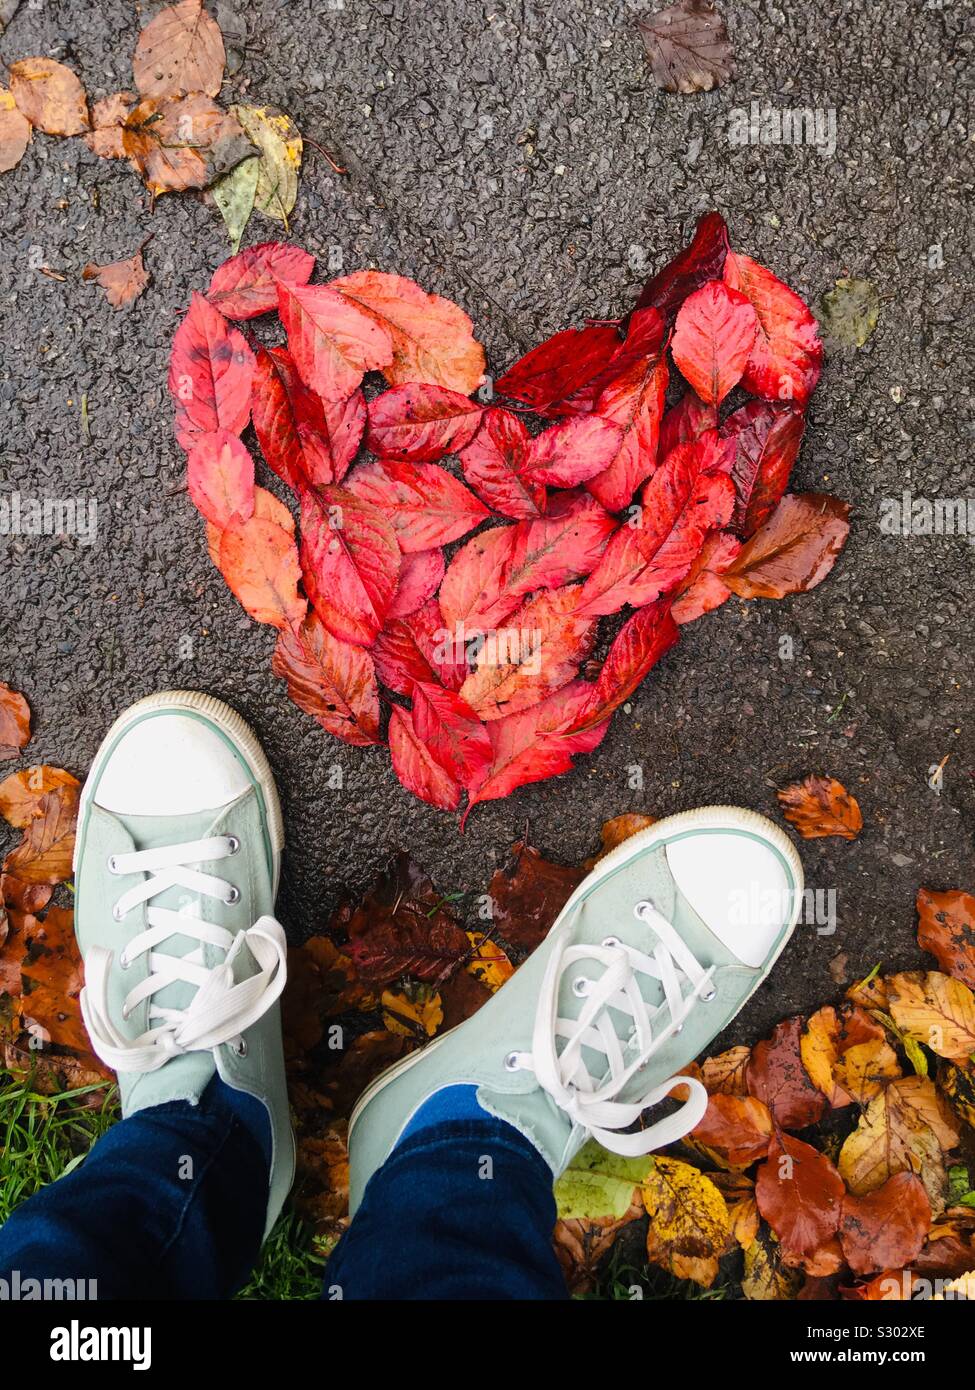 Heart made of leaves on the path with shoes looking down Stock Photo